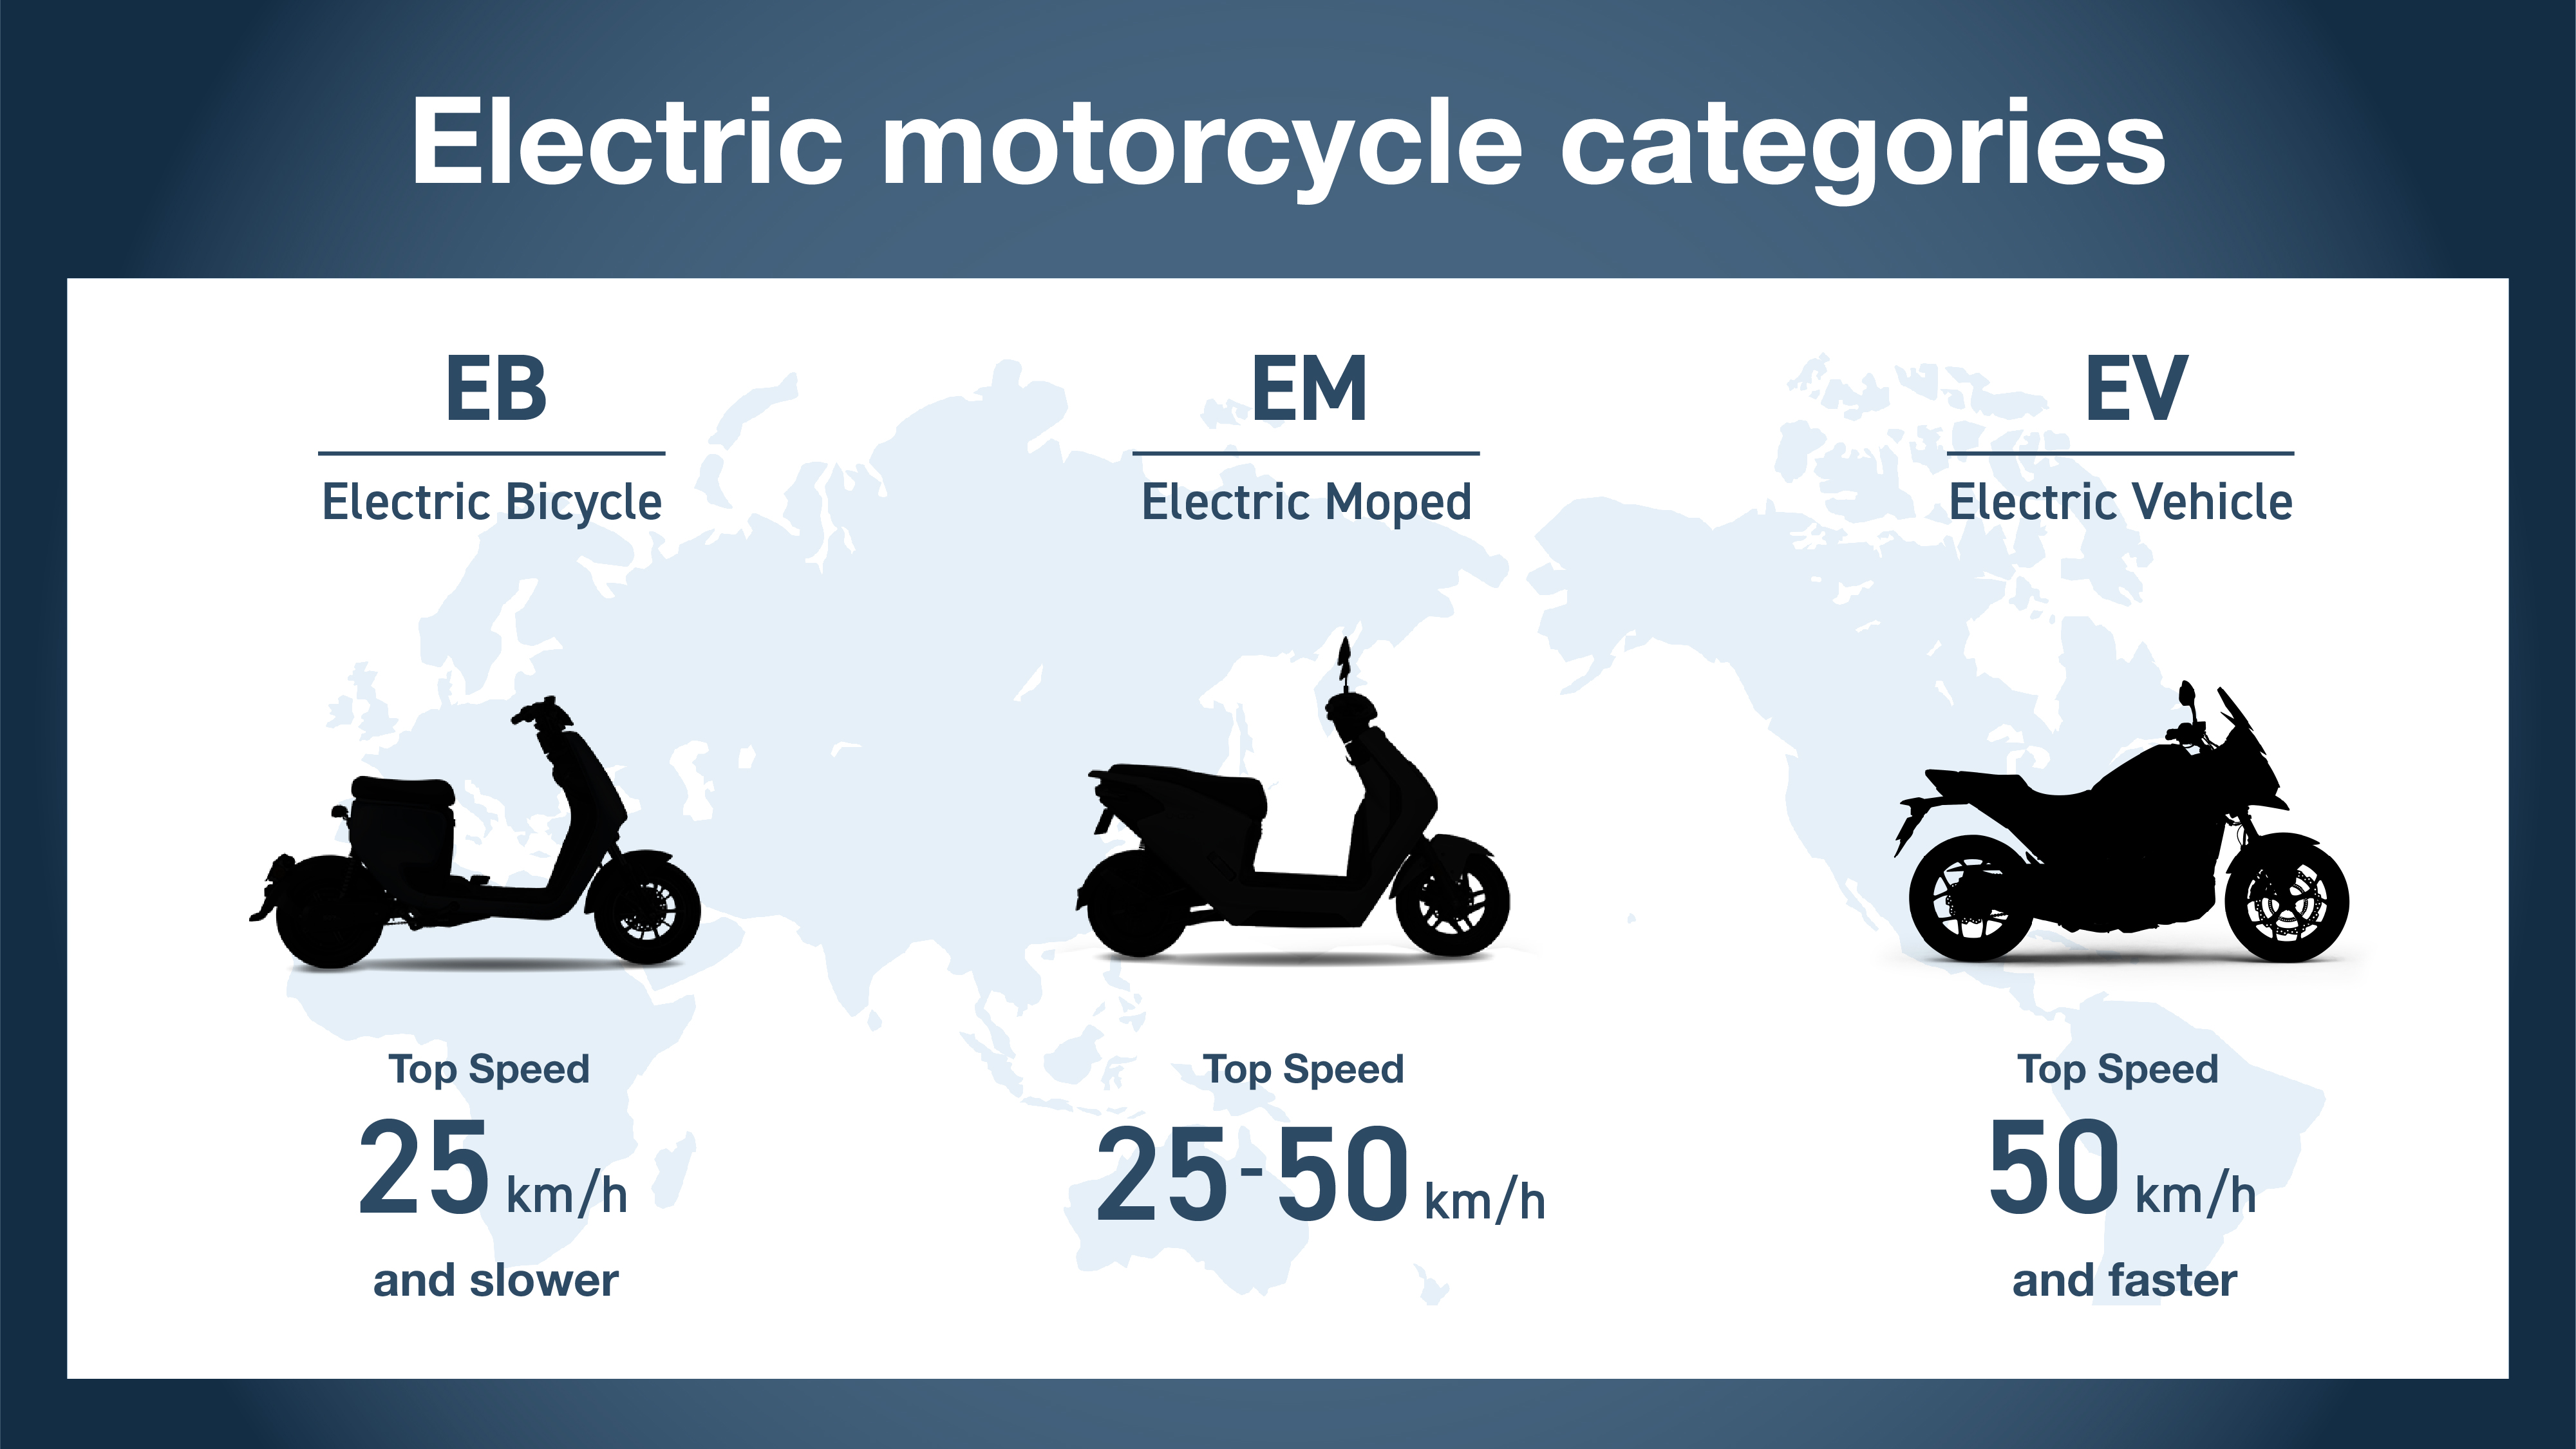 Electric motorcycle categories